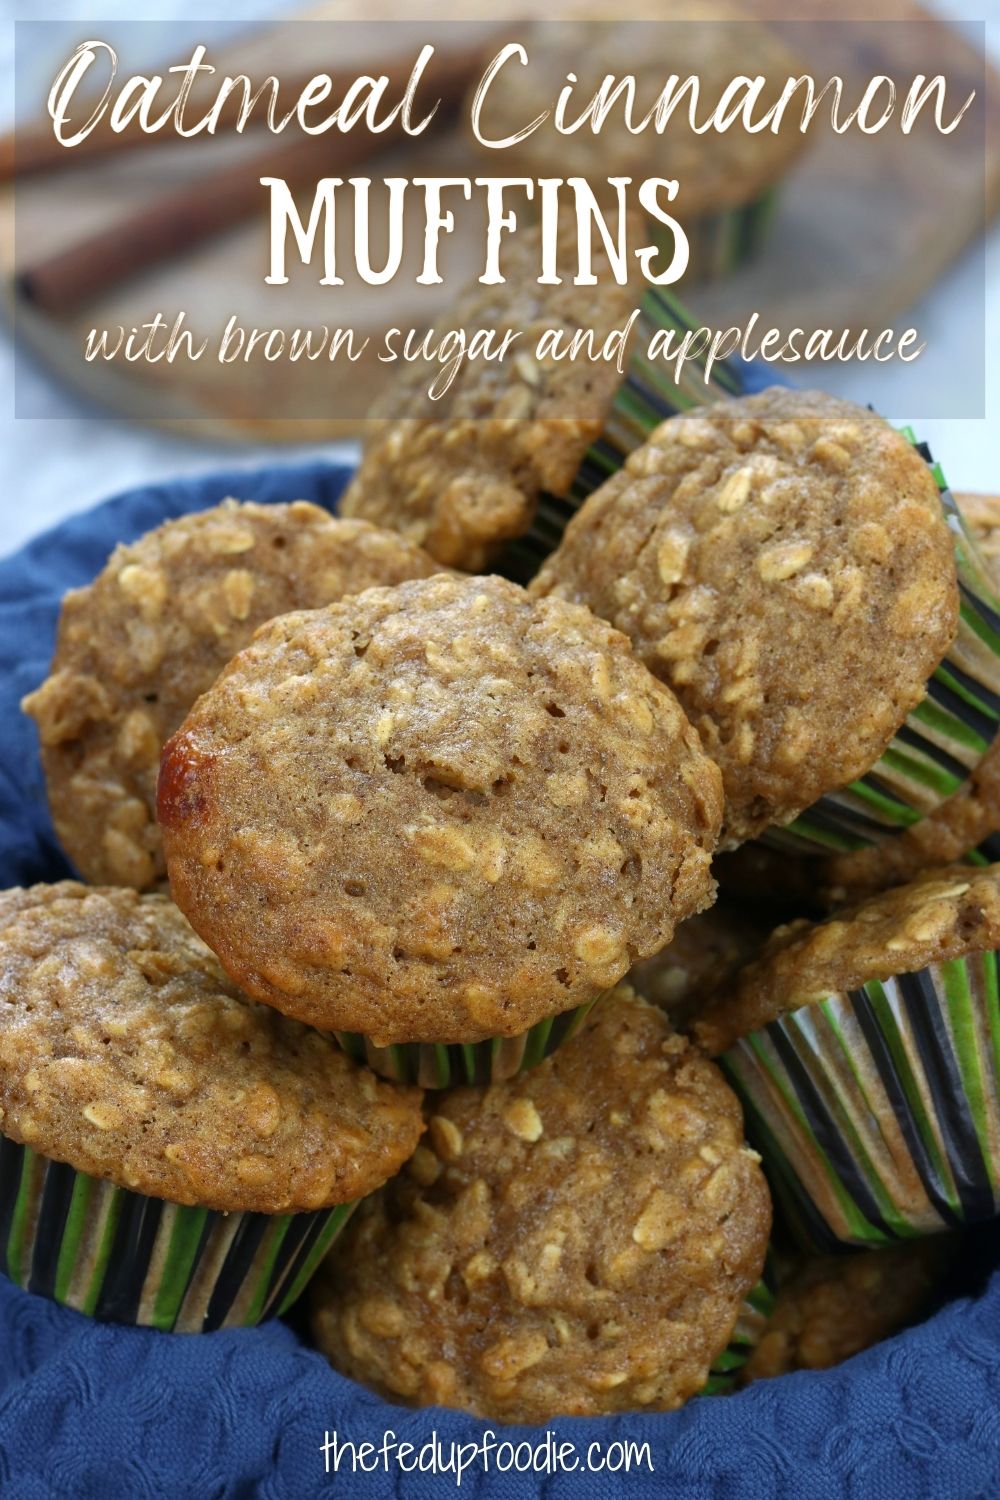 Tender, moist and perfectly spiced Oatmeal Cinnamon Muffins makes a delicious breakfast, snack or companion to winter dinners. Easy to make, freezer friendly and a tasty way to eat oatmeal. 
#OatmealCinnamonMuffins #AppleOatmealCinnamonMuffins #AppleOatmealCinnamonMuffins #OatmealCinnamonMuffinsHealthy #EasyOatmealCinnamonMuffins #OatmealCinnamonMuffinsRecipe